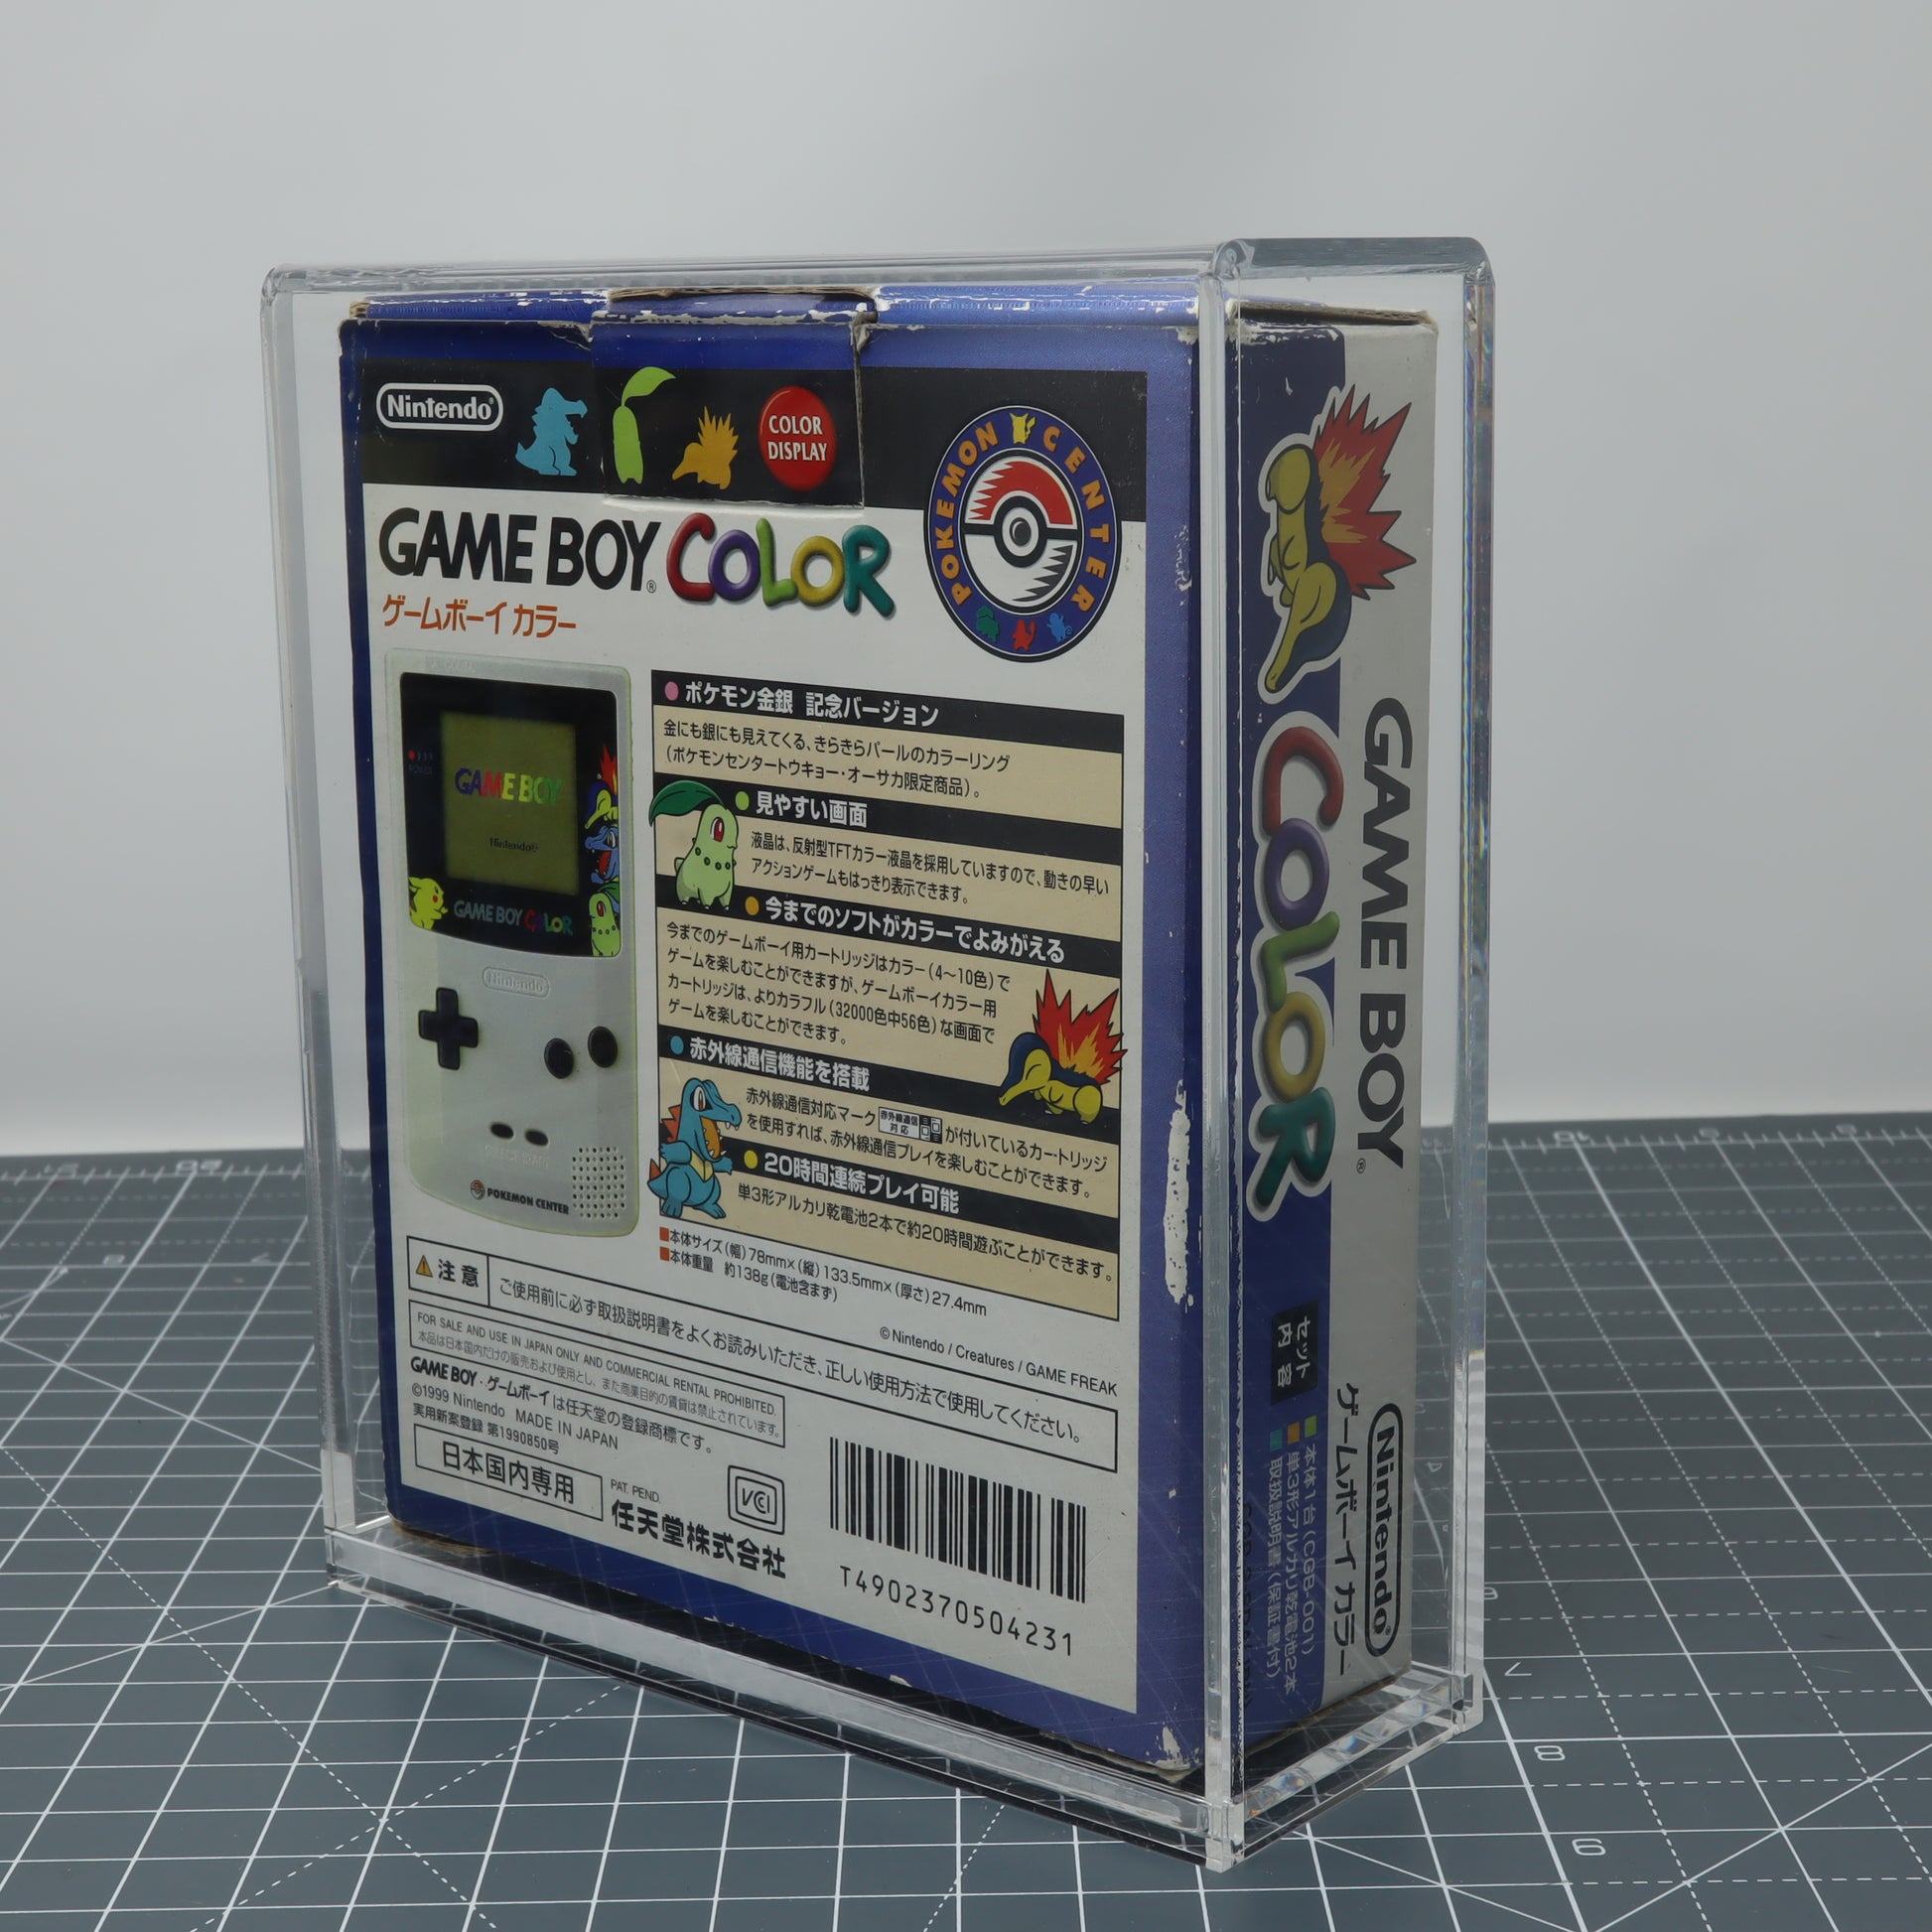 Game Boy Color Pokemon center limited addition boxed console stored inside custom acrylic display capsule rear image